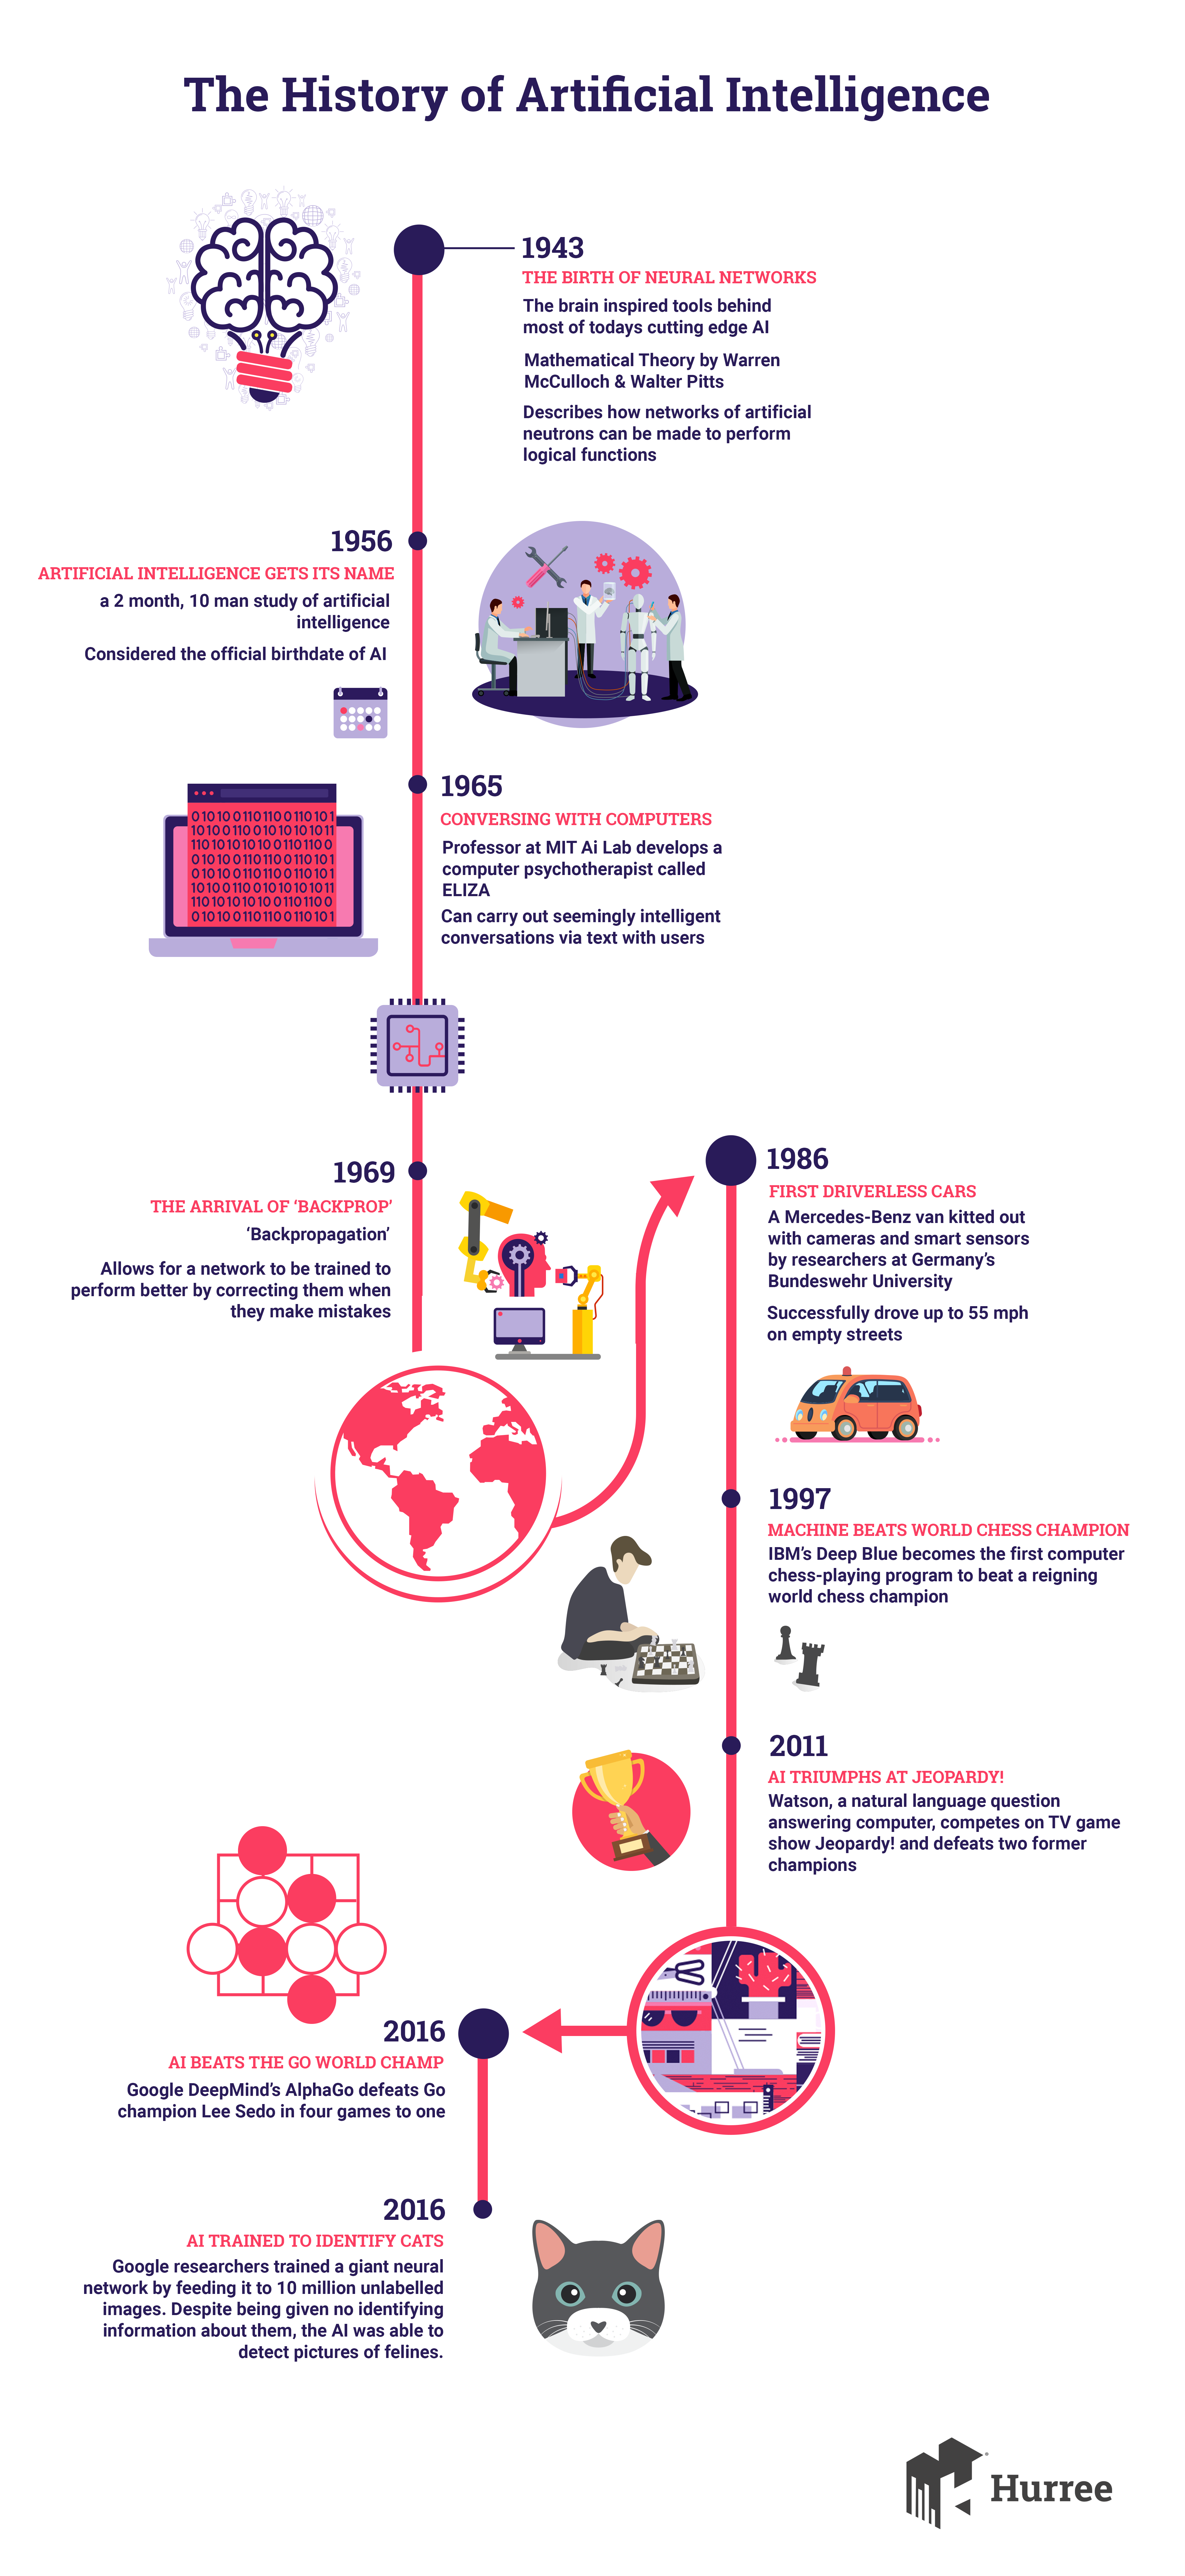 History of artificial intelligence infographic